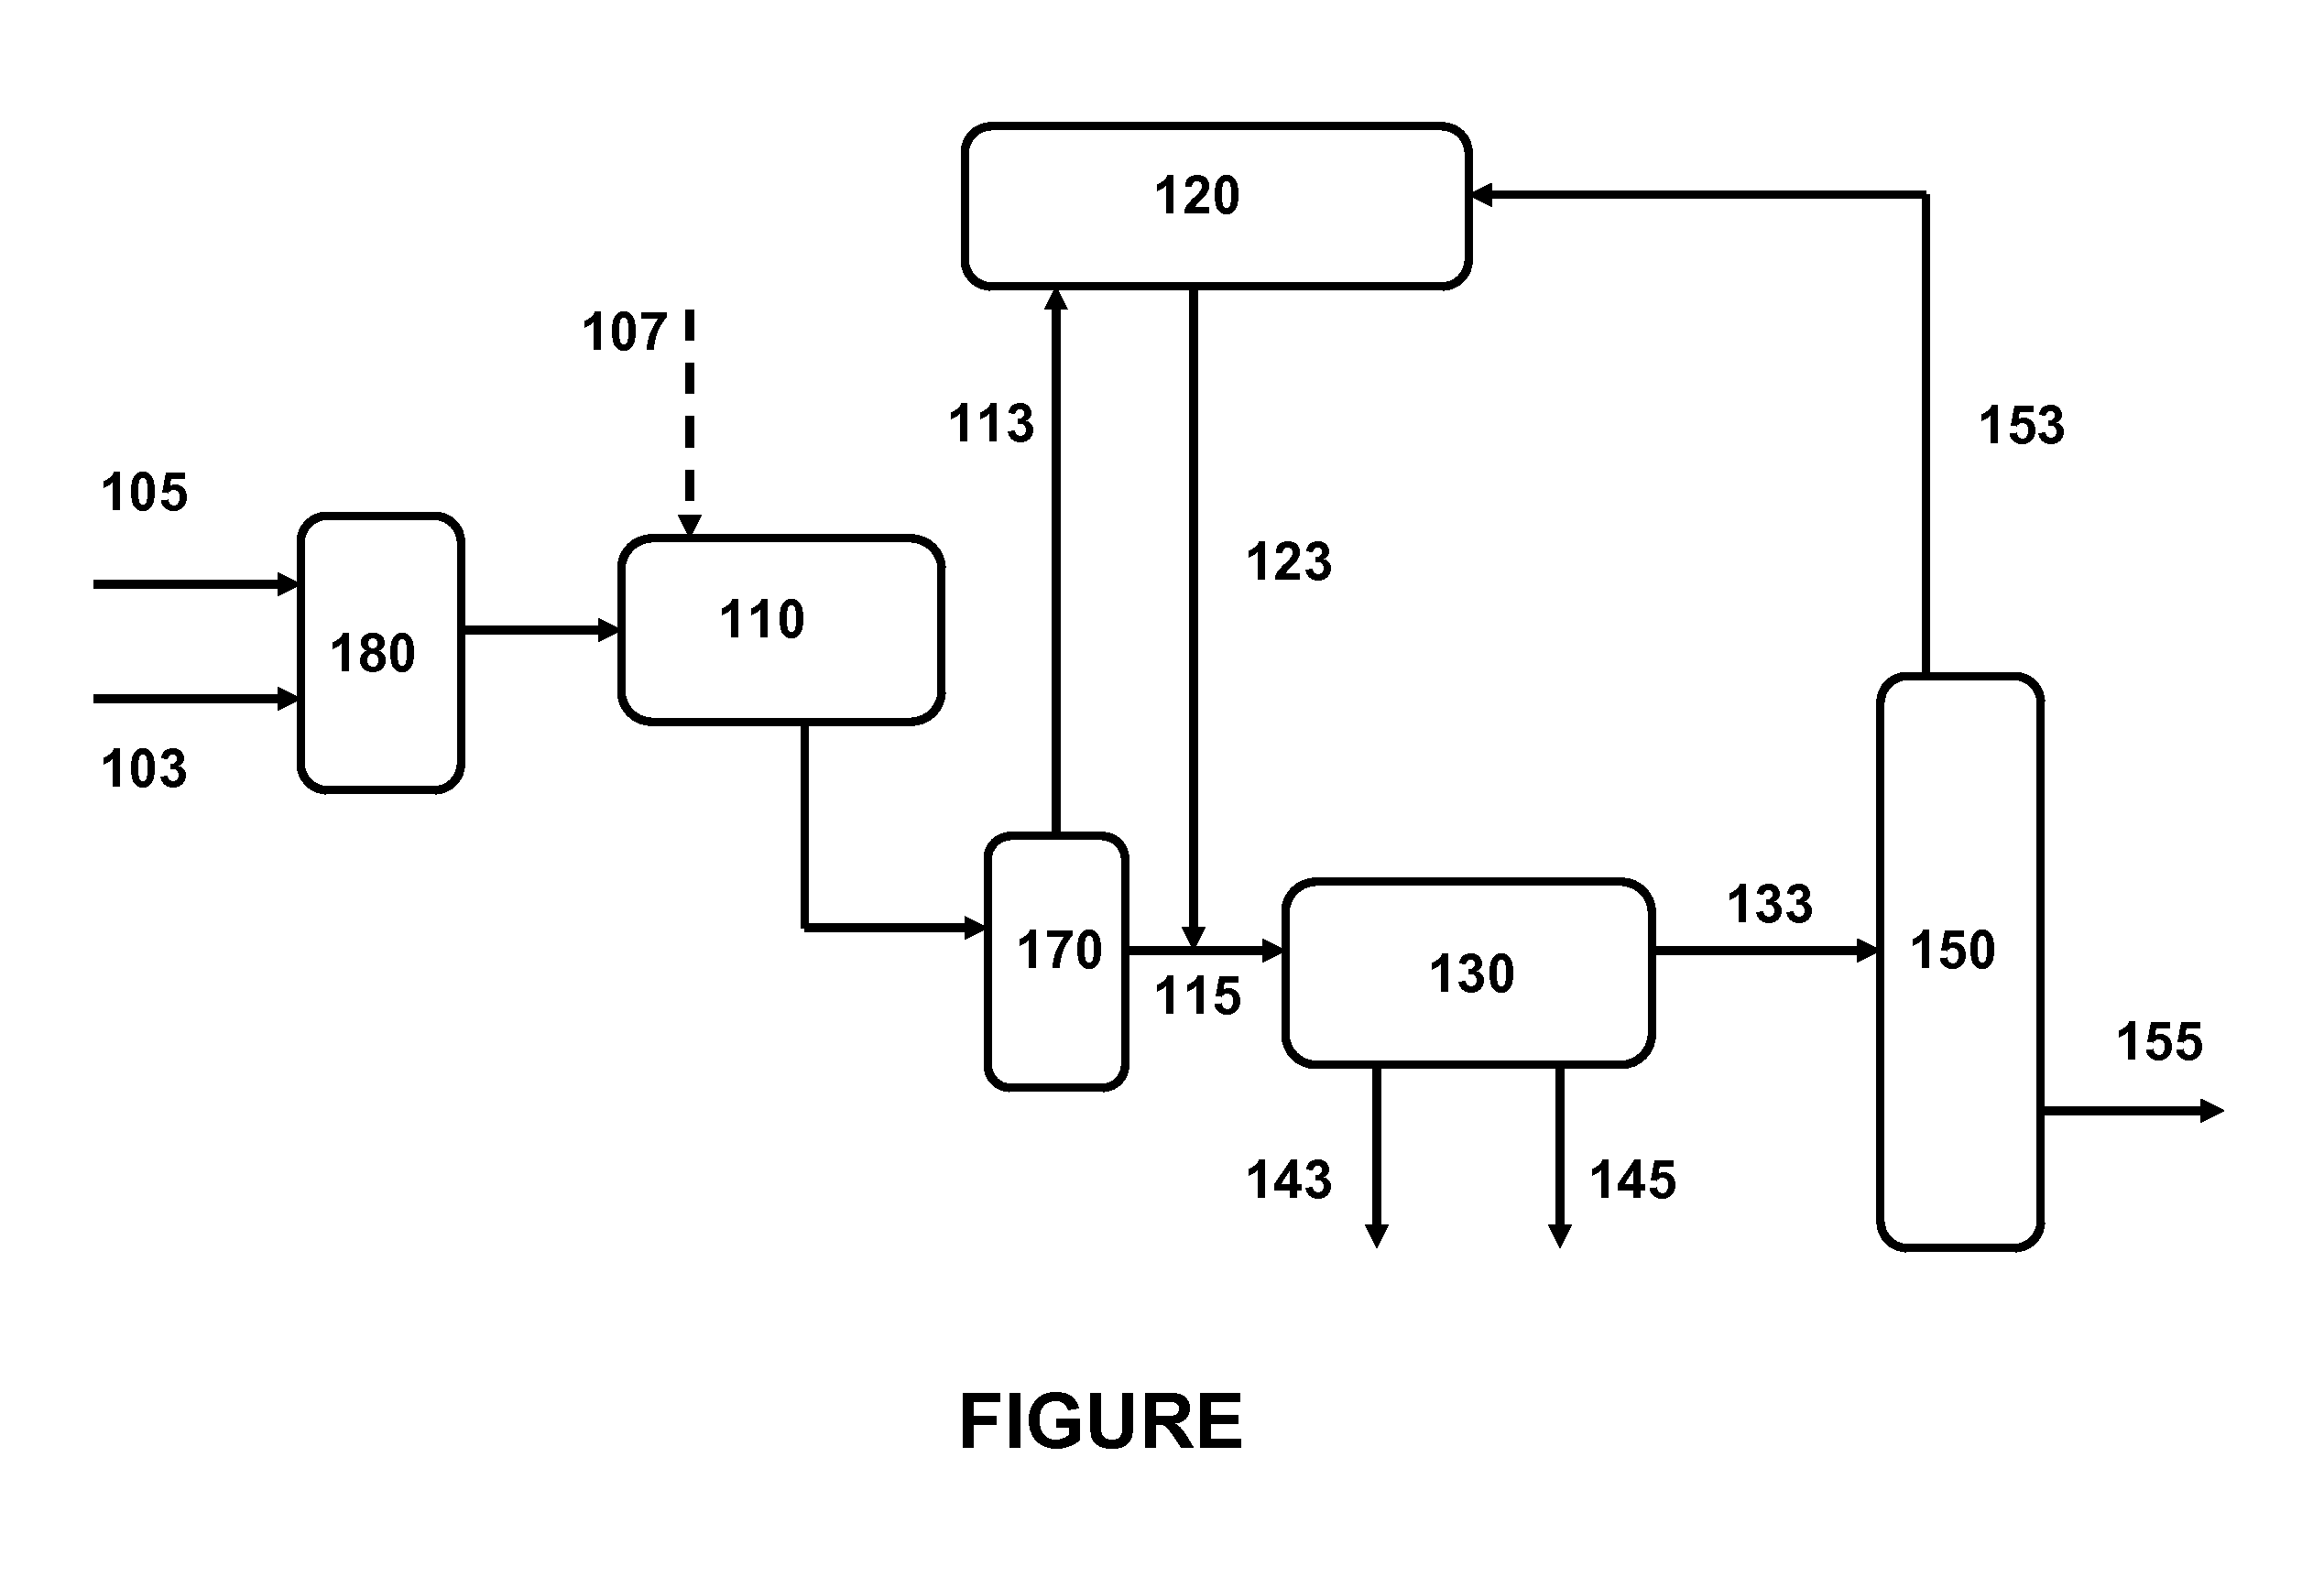 Process for producing a high stability desulfurized heavy oils stream